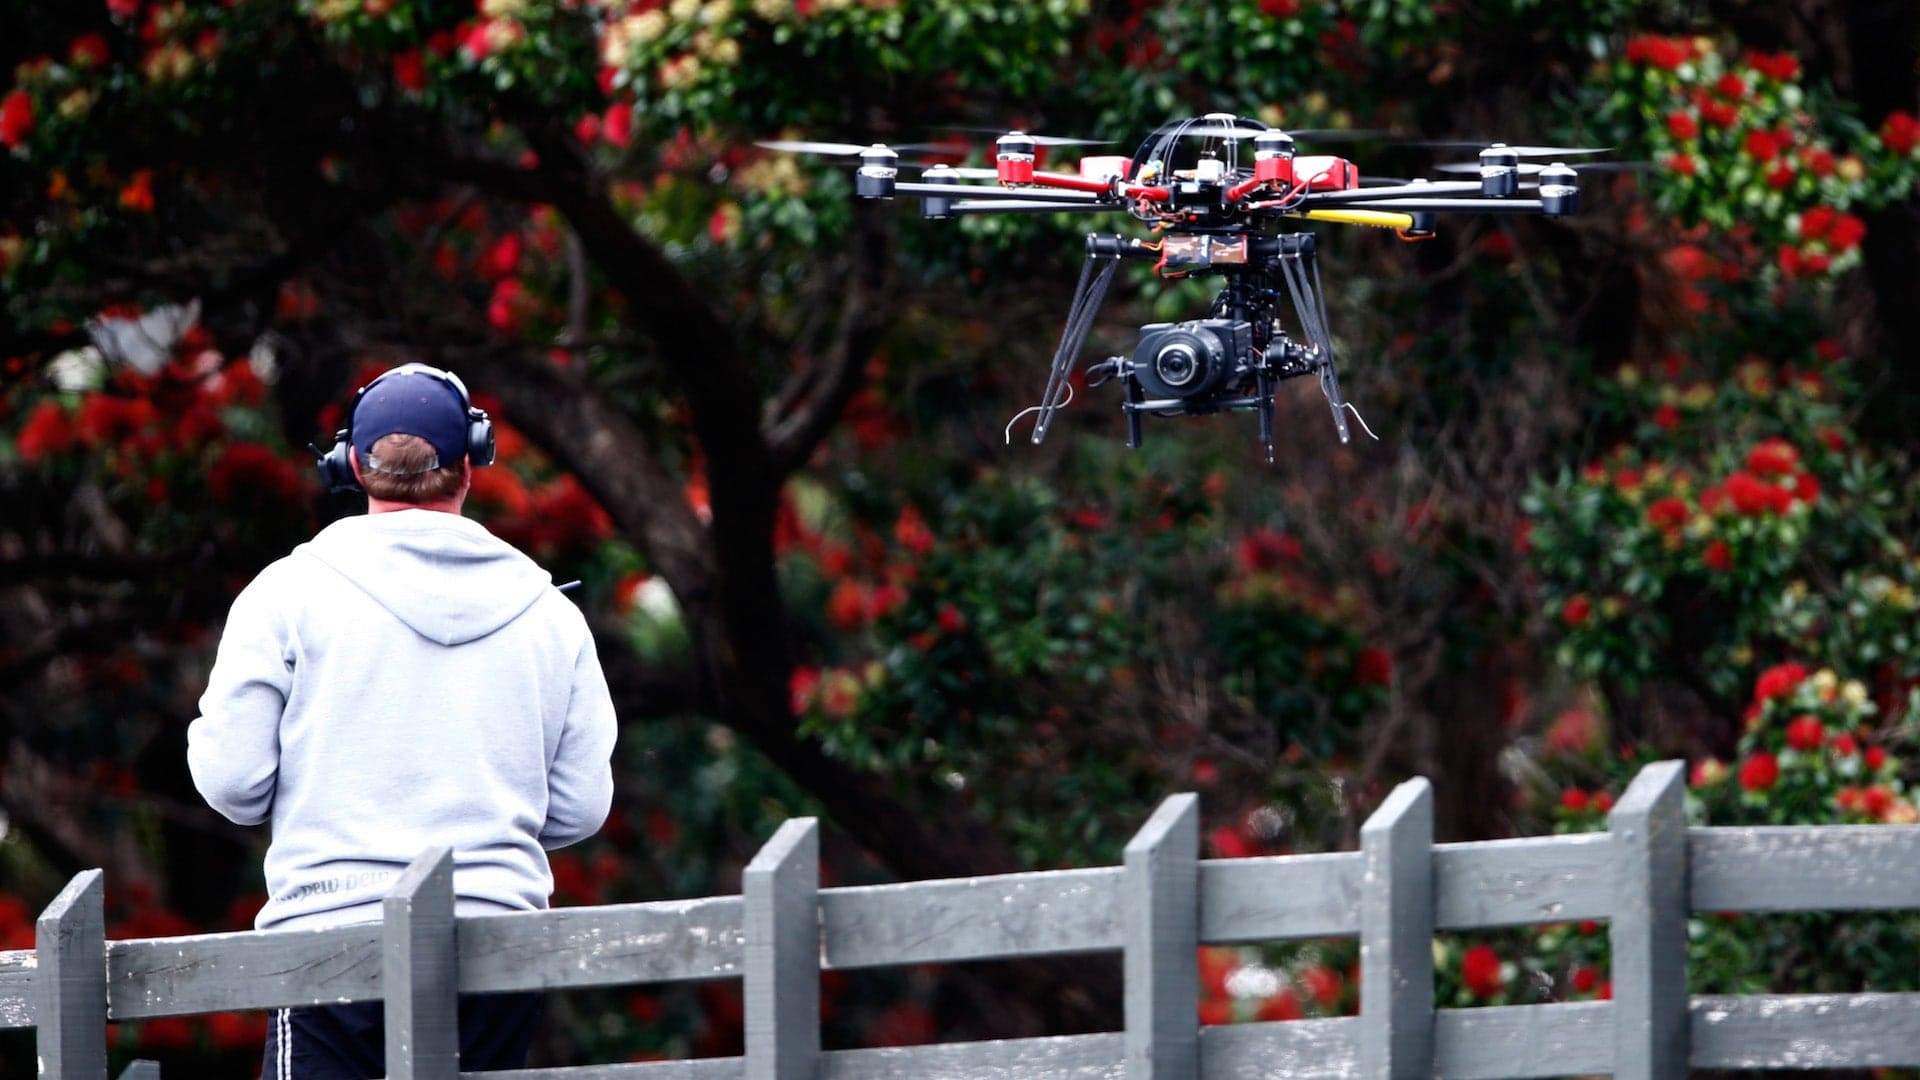 New Zealand’s Civil Aviation Authority Seeks Stricter Rules for Hobby Drone Pilots